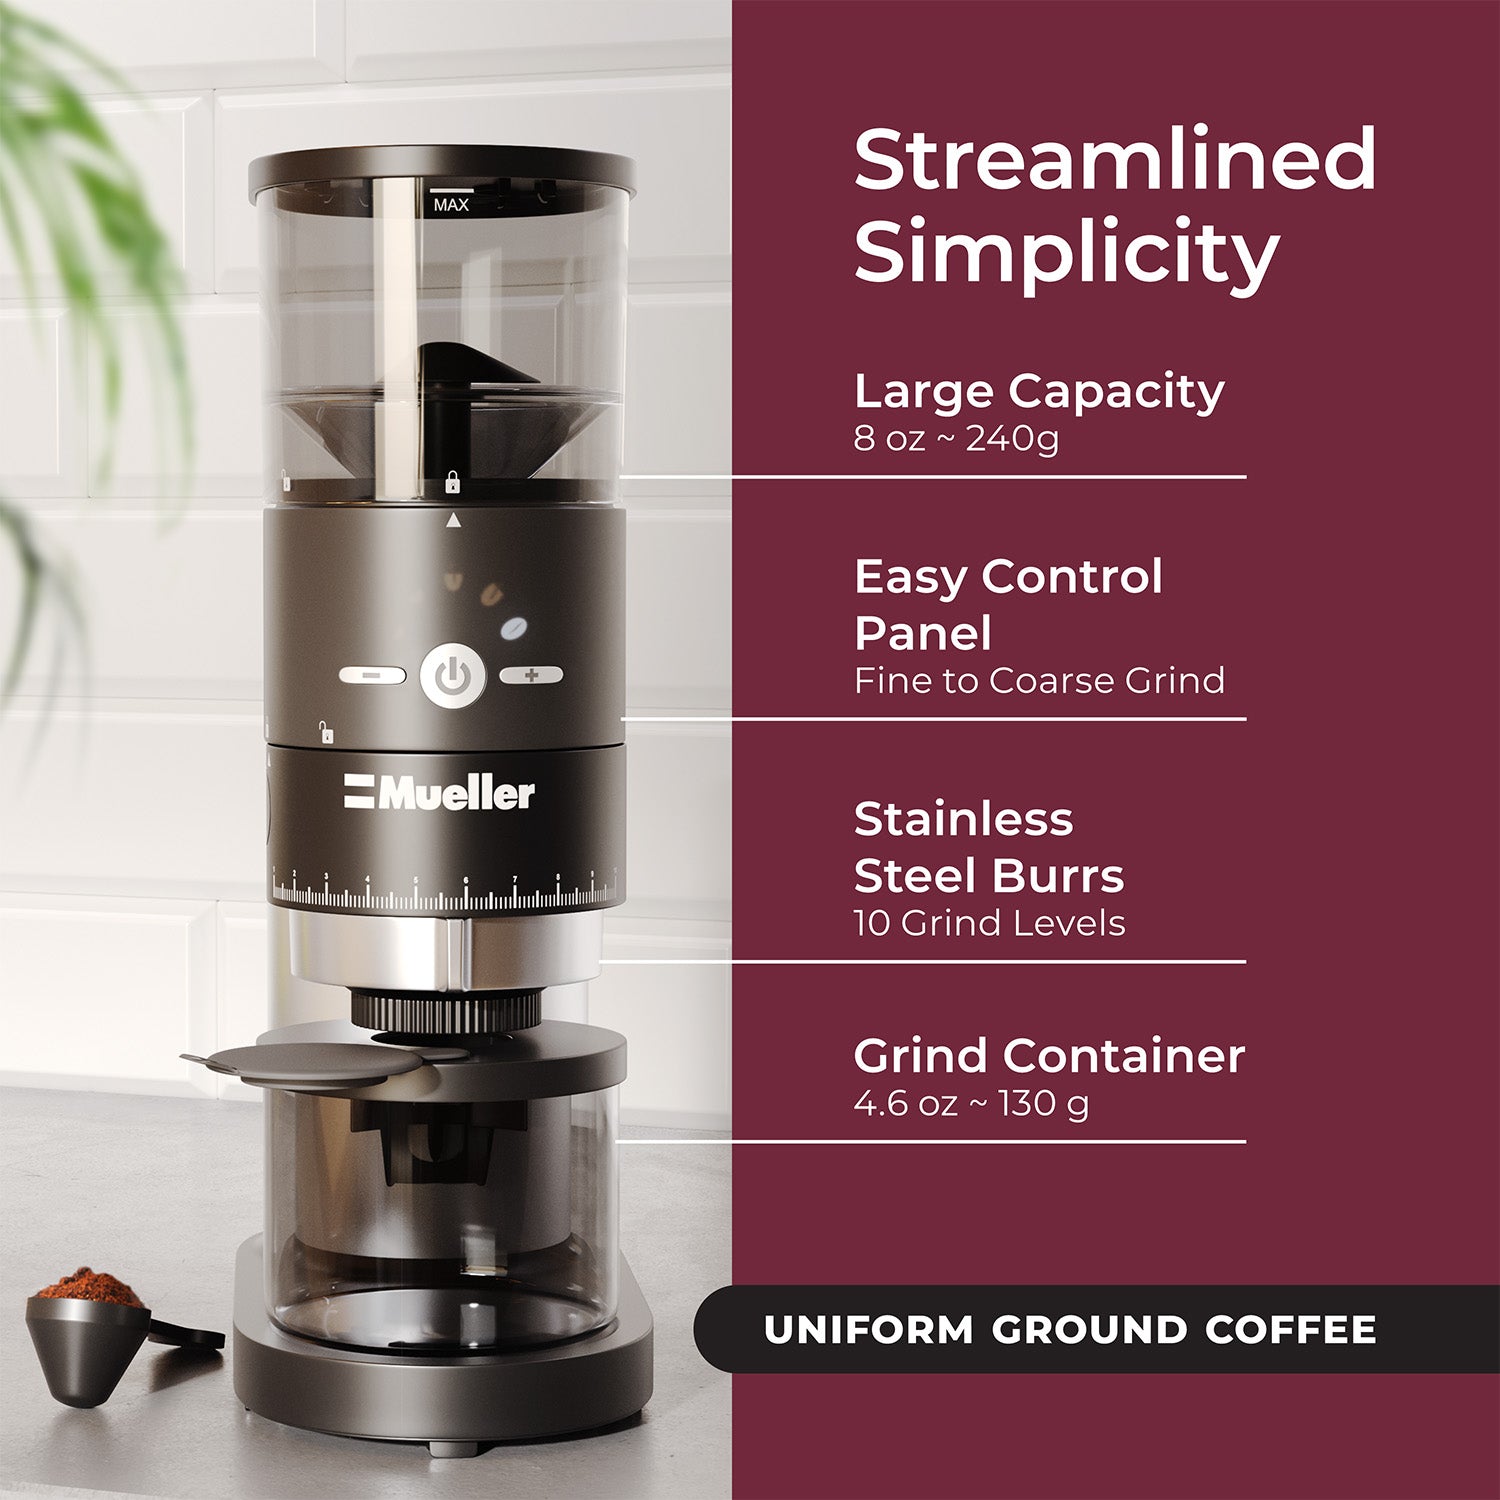 Silent Coffee Bean Grinder Electric - China Stainless Steel Coffee